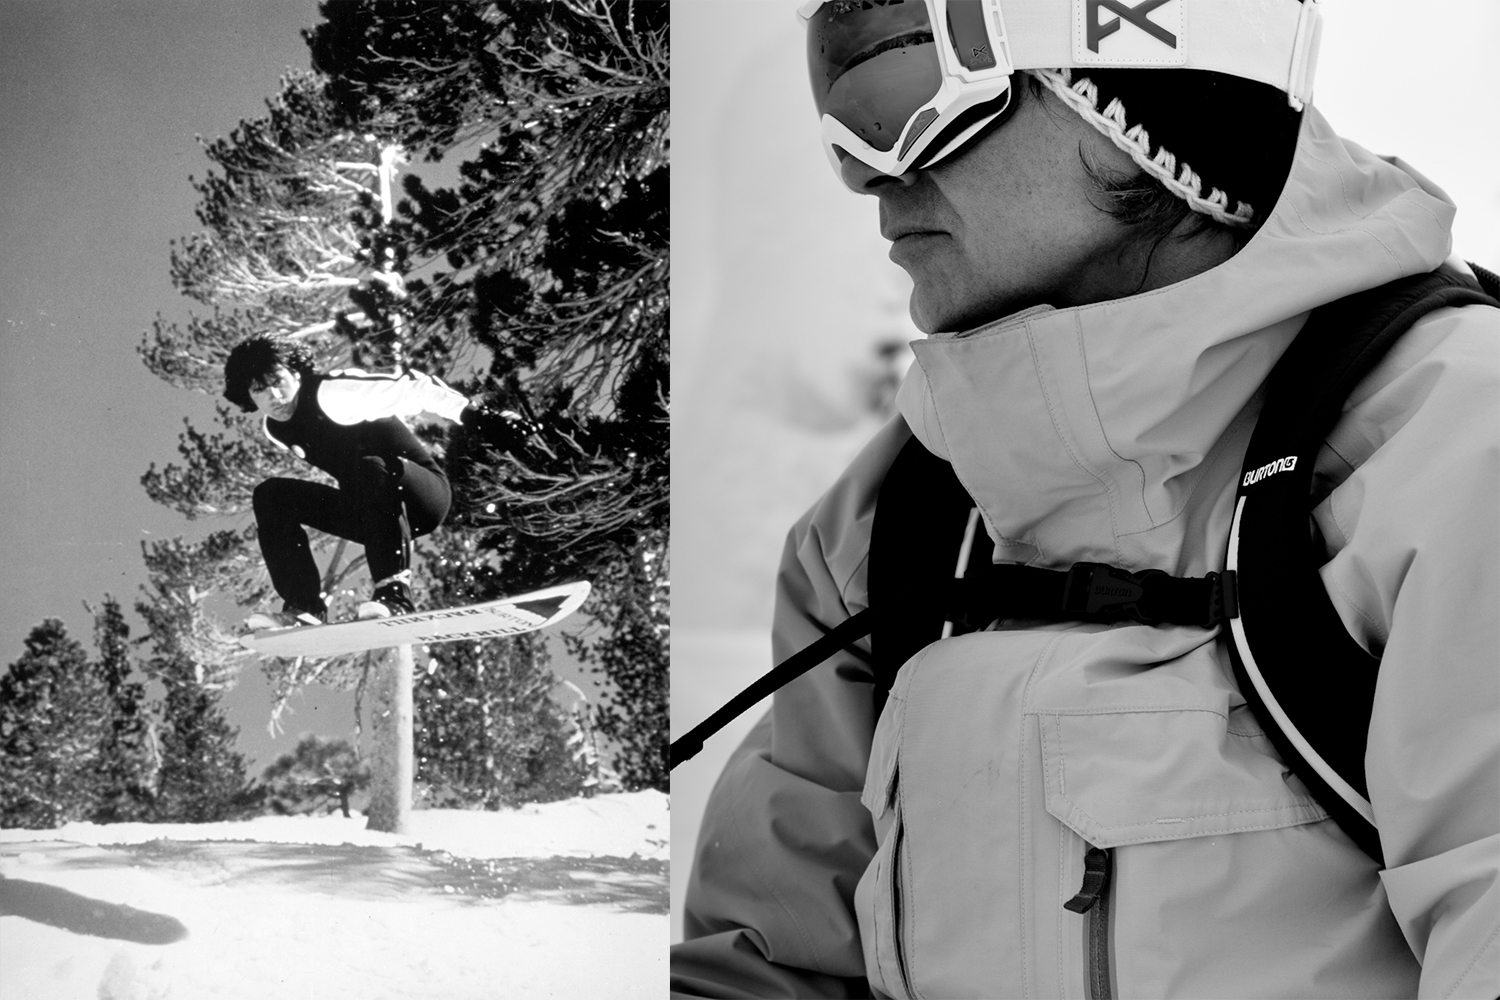 Two black and white photos. Left, Jake Burton riding an old-school snowboard. Right, a profile of Burton with snow goggles over his face.